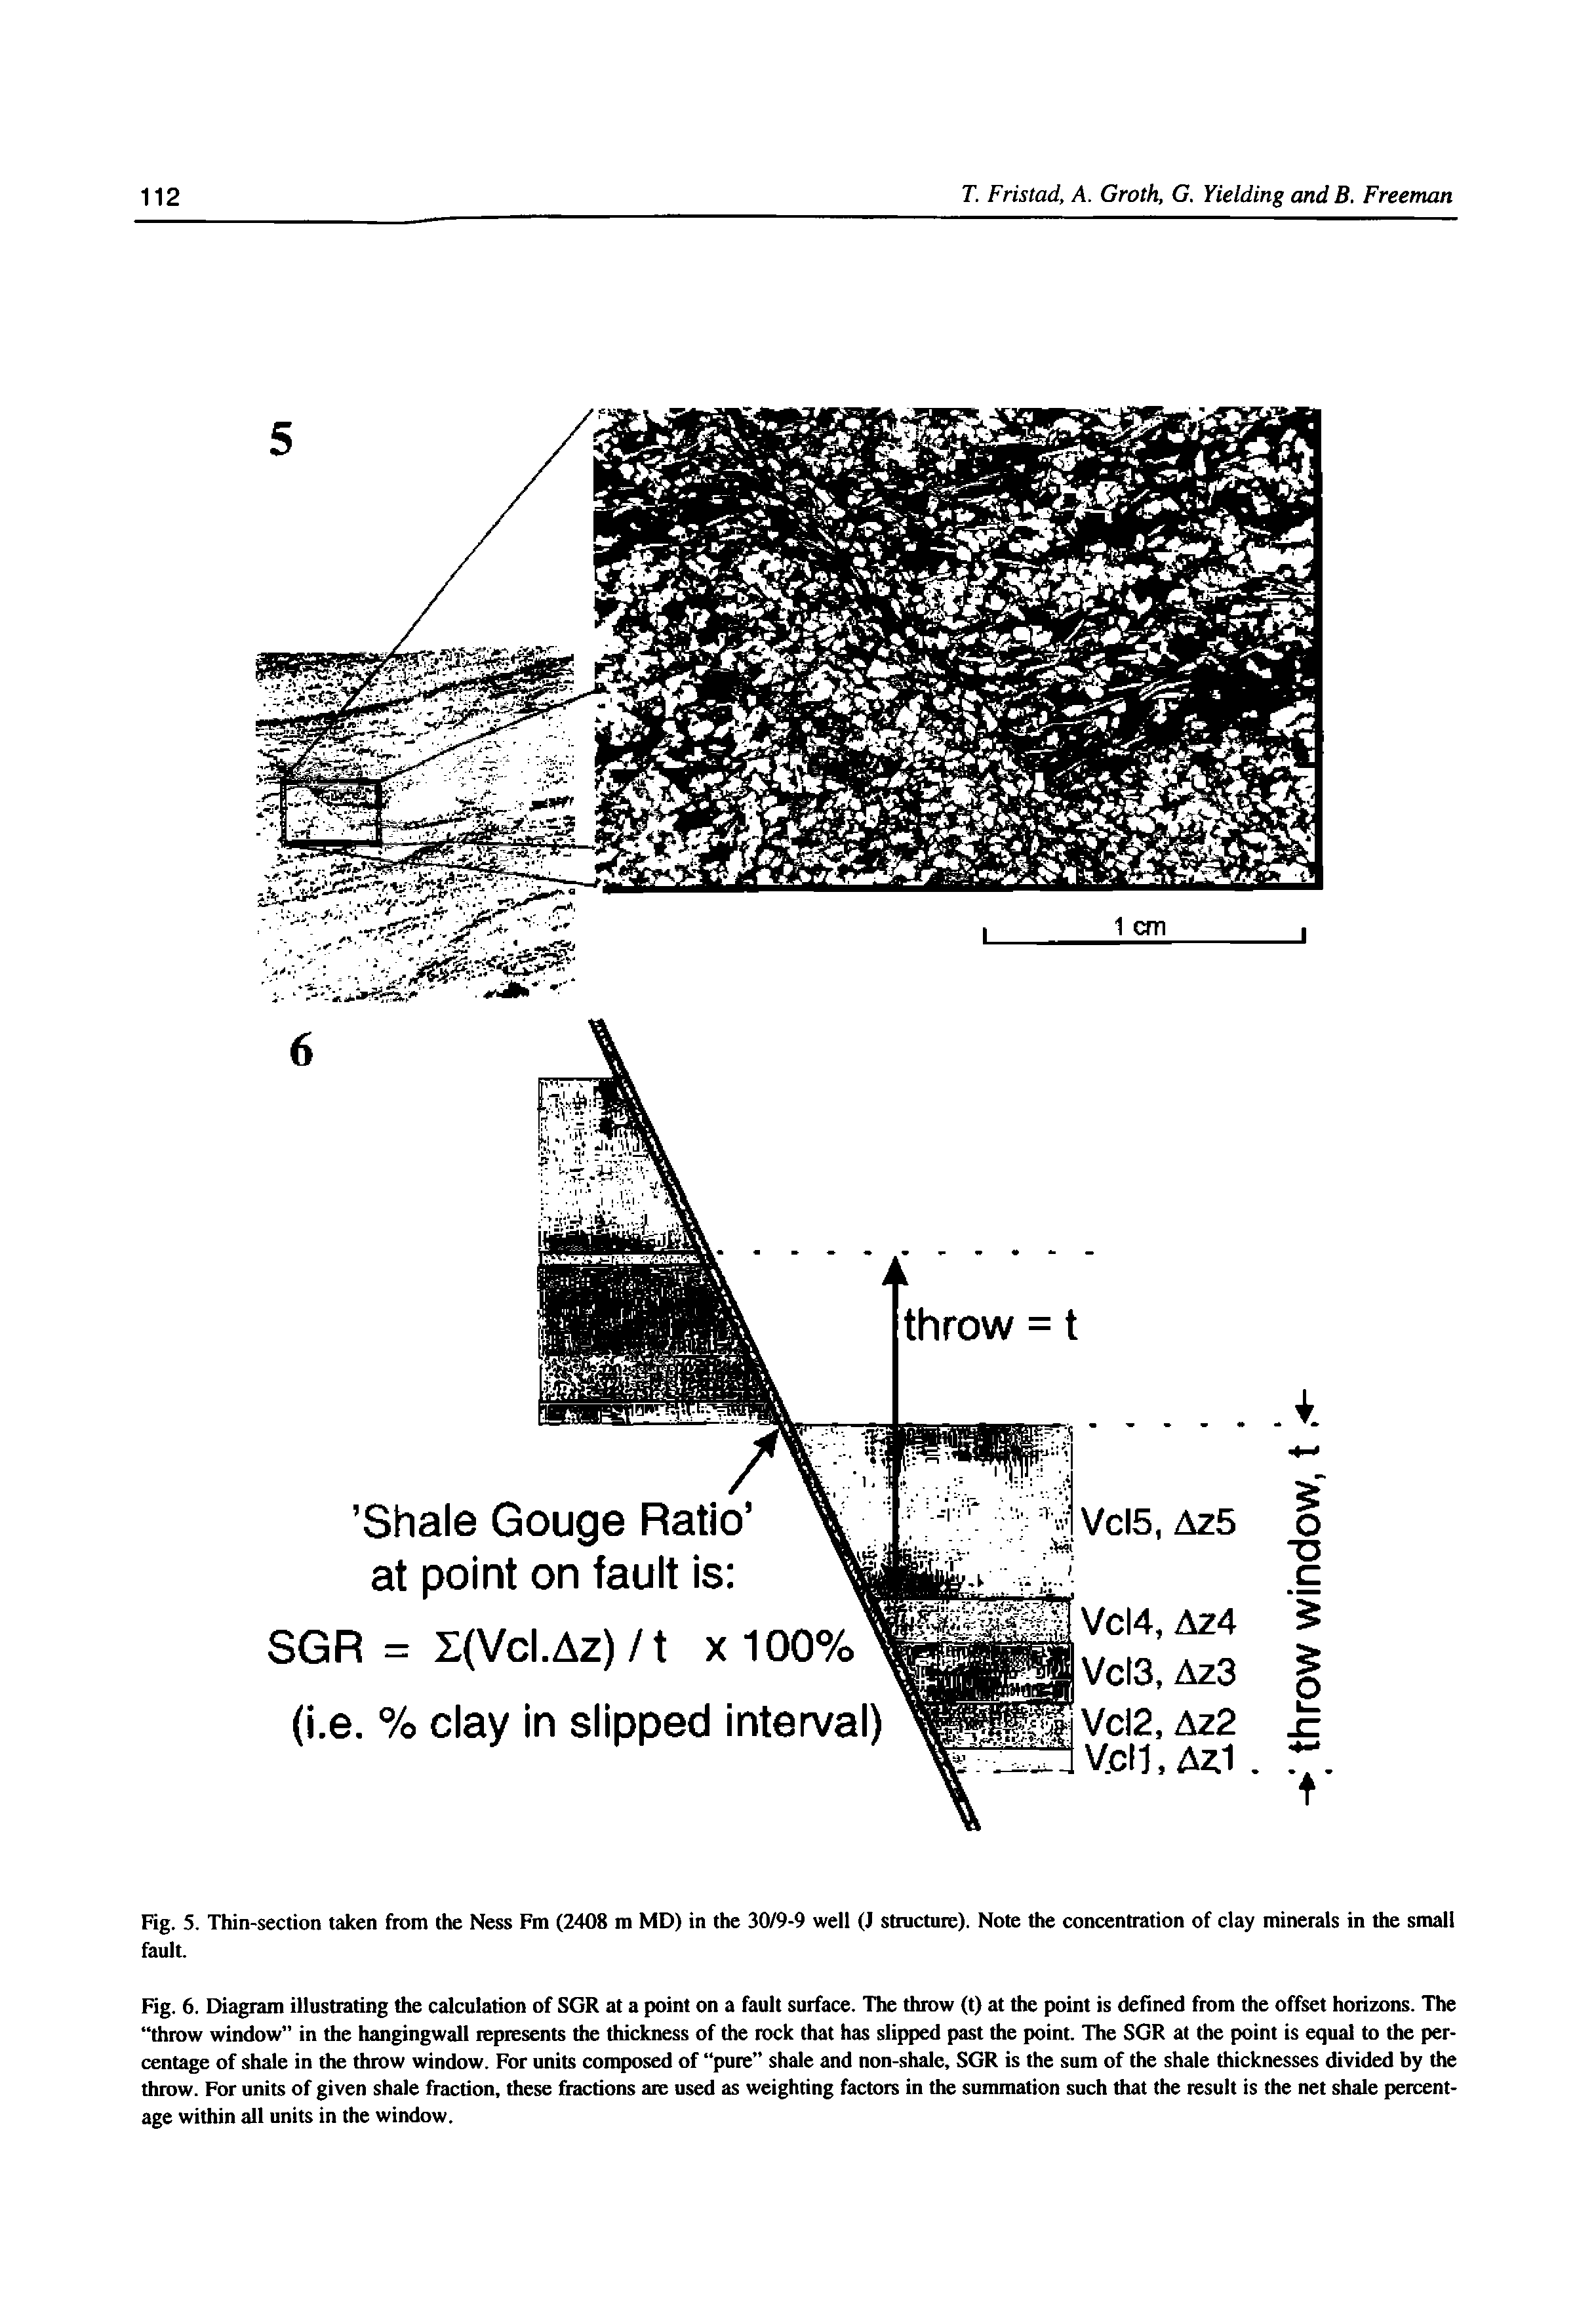 Fig. 6. Diagram illustrating the calculation of SGR at a point on a fault surface. The throw (t) at the point is defined from the offset horizons. The throw window in the hangingwall represents the thickness of the rock that has slipped past the point. The SGR at the point is equal to the percentage of shale in the throw window. For units composed of pure shale and non-shale, SGR is the sum of the shale thicknesses divided by the throw. For units of given shale fraction, these fractions are used as weighting factors in the summation such that the result is the net shale percentage within all units in the window.